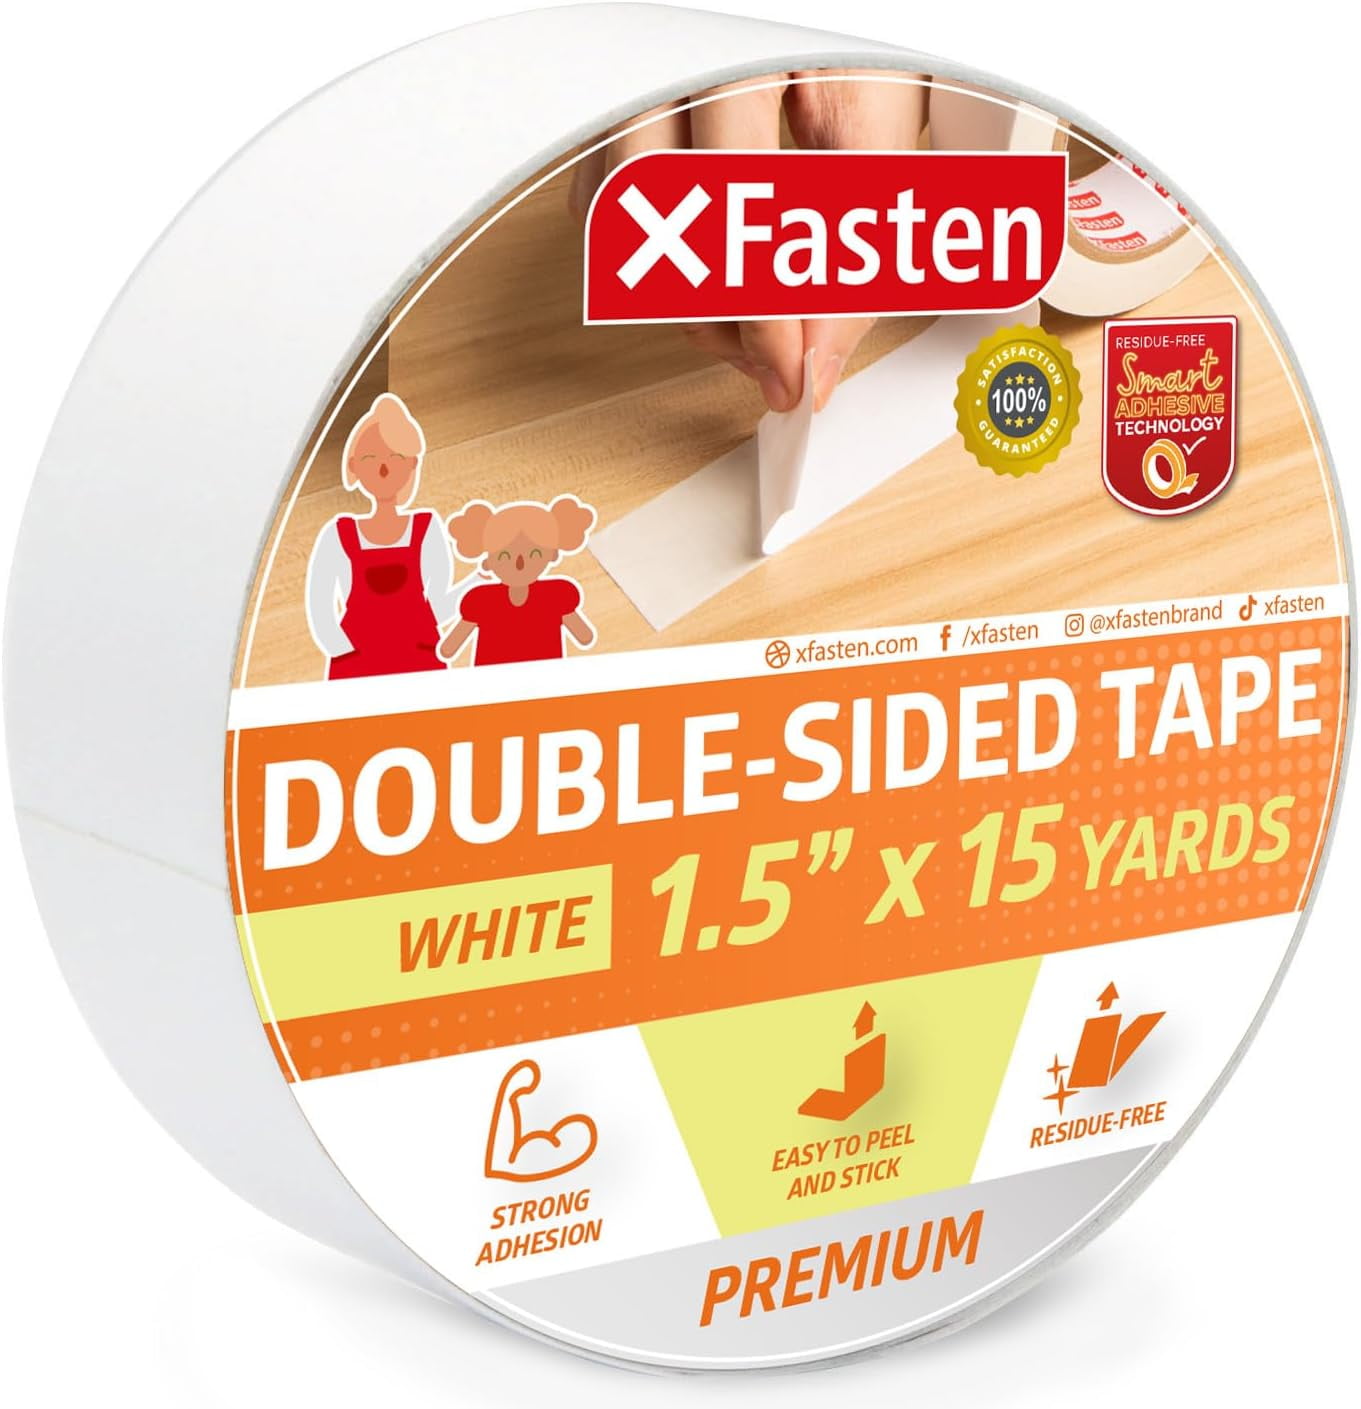  1 Inch x 46 Ft Heavy Duty Adhesive Tape, Strips with Adhesive,  Strong Double Sided Self Adhesive Heavy Duty Strips for Home Office School  Car and Crafting Organization, White : Arts